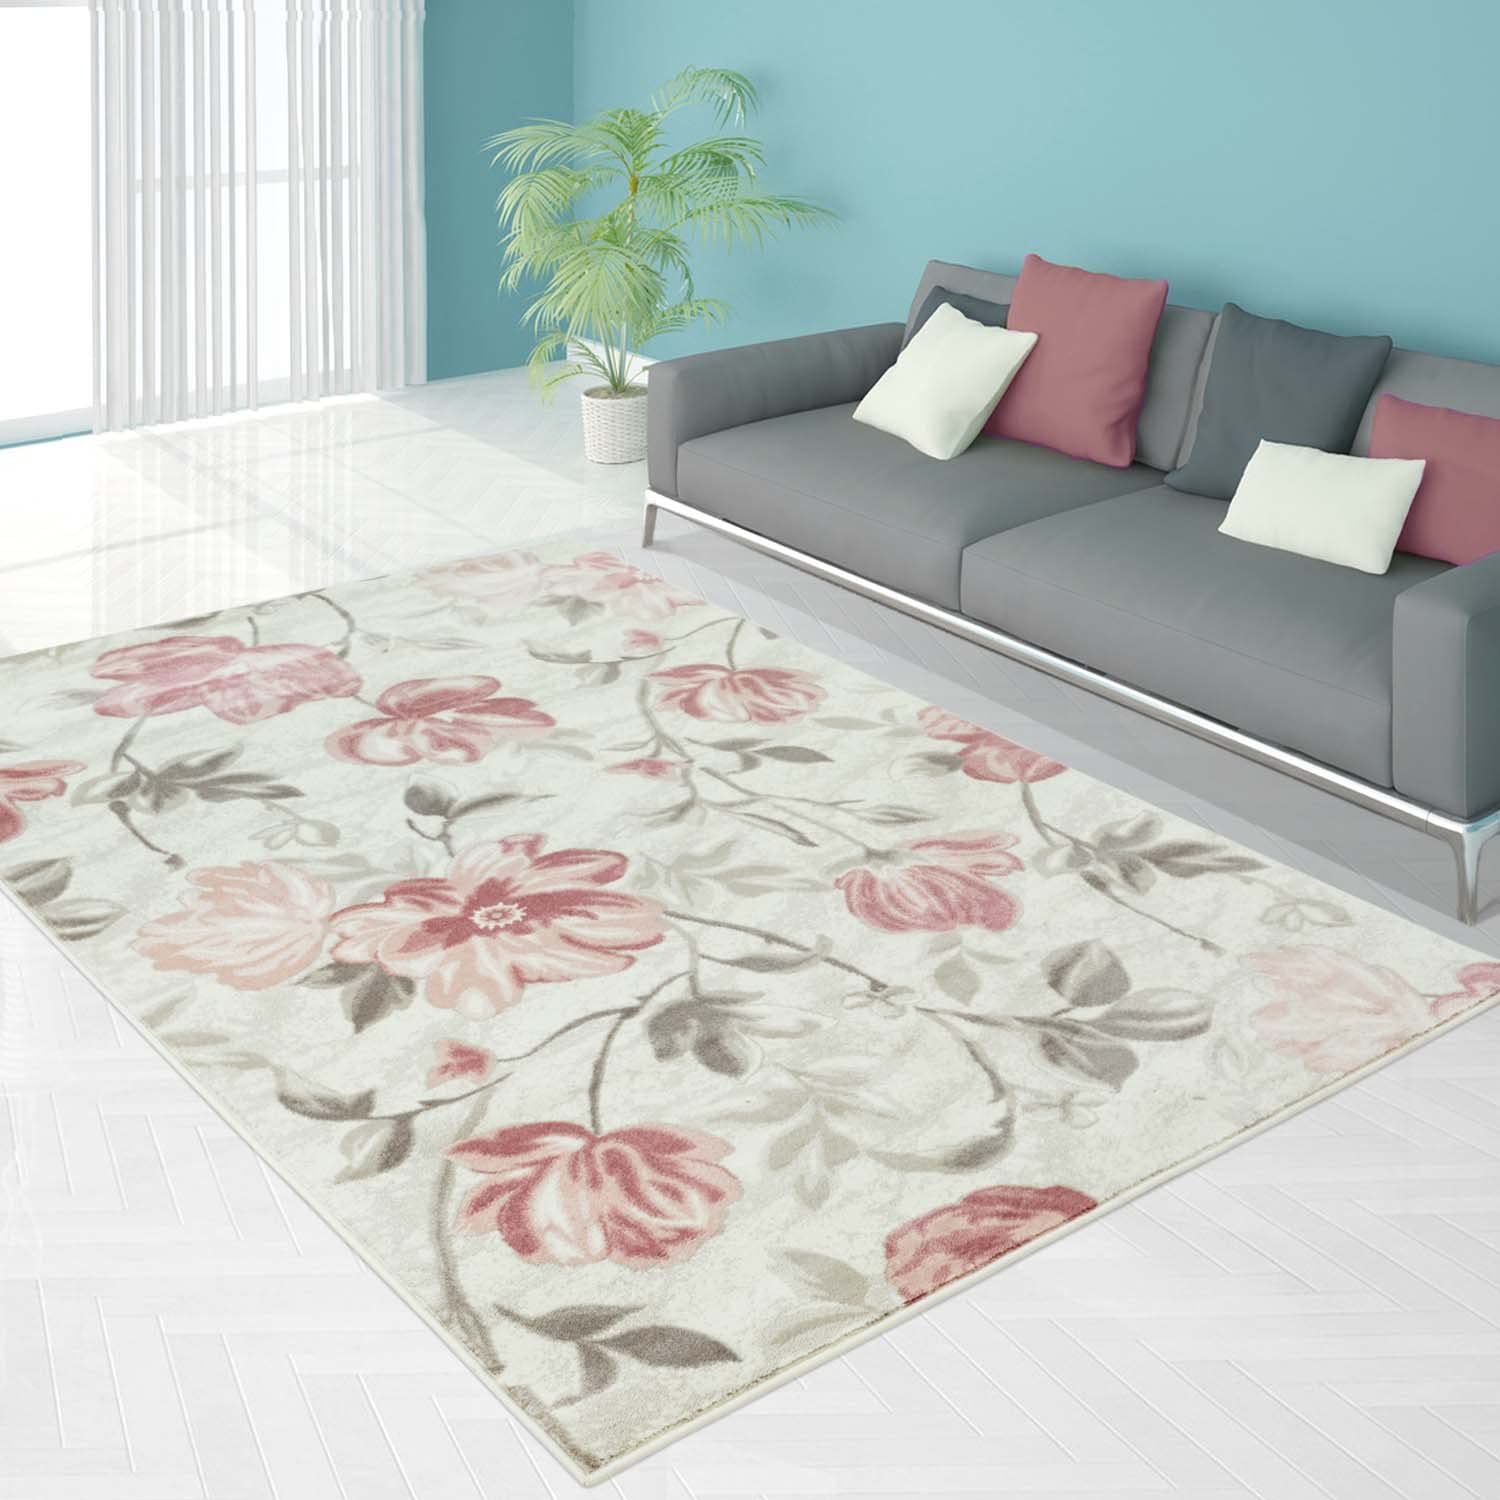 begonia cream floral area rug pink 5x7, 5x8 ft Contemporary, Living Room Carpet, Bedroom, Home Office